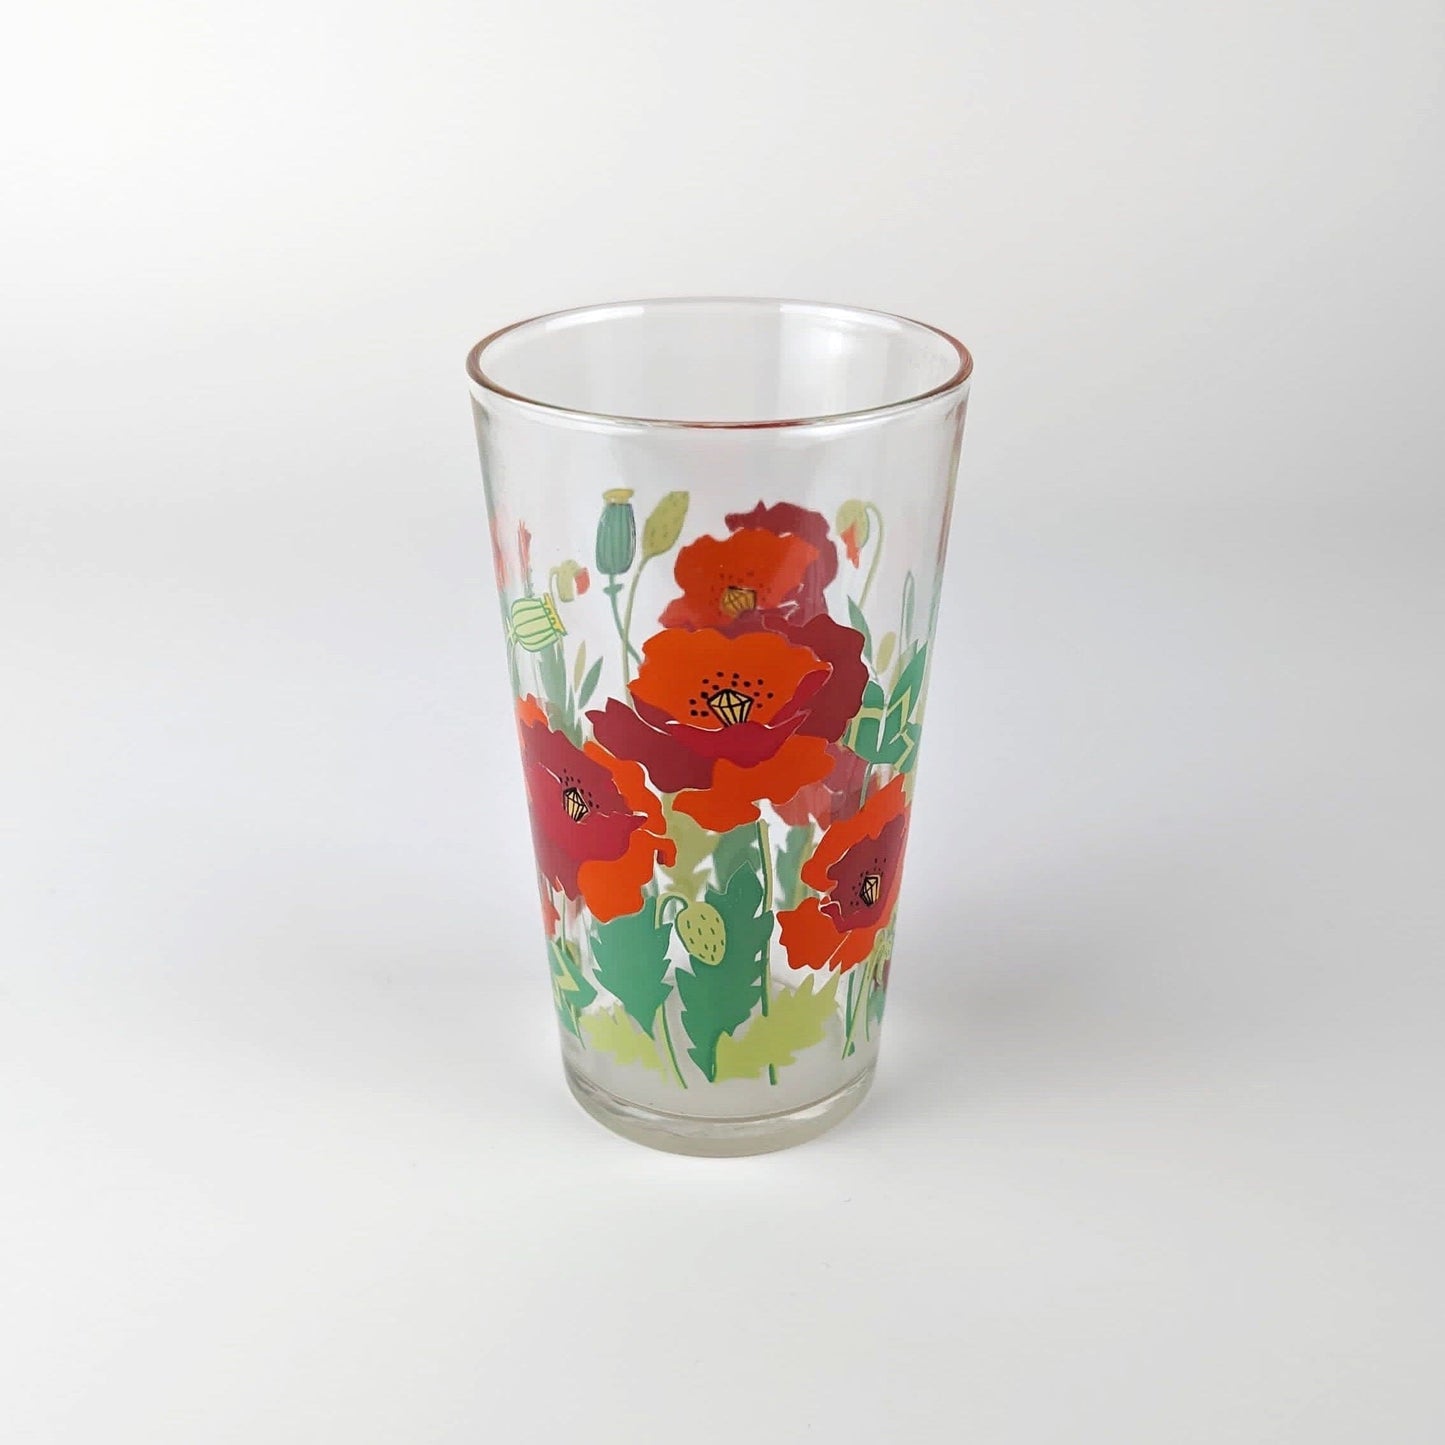 4 Vintage Drinking Glasses Flowers Floral Poppy Flowers France Red Juice Glass Water Glass Glass 80s 1980 Leaf